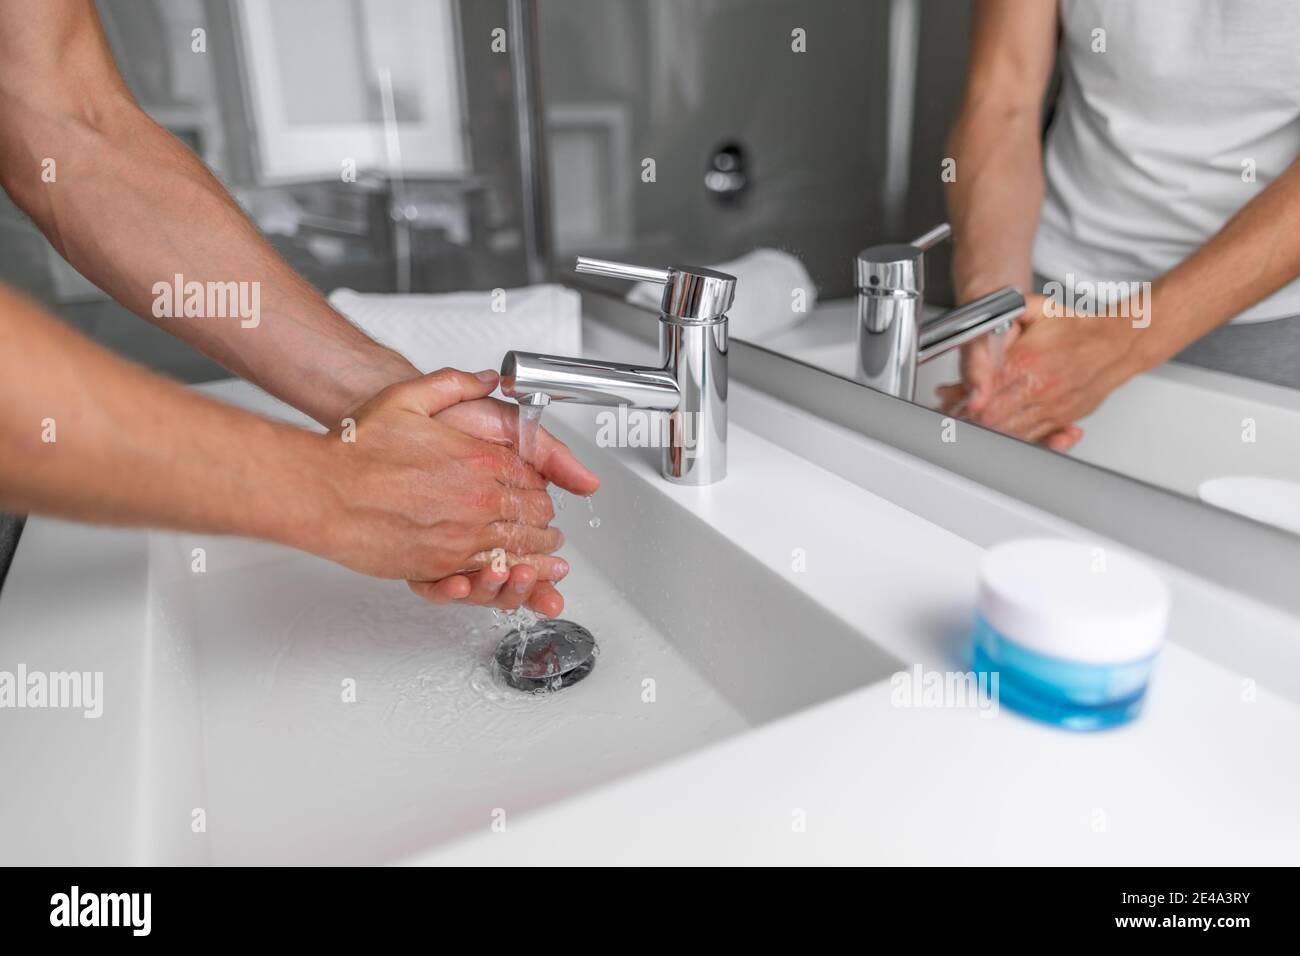 Man washing hands in hot water bathroom faucet sink running water for clean wash Stock Photo